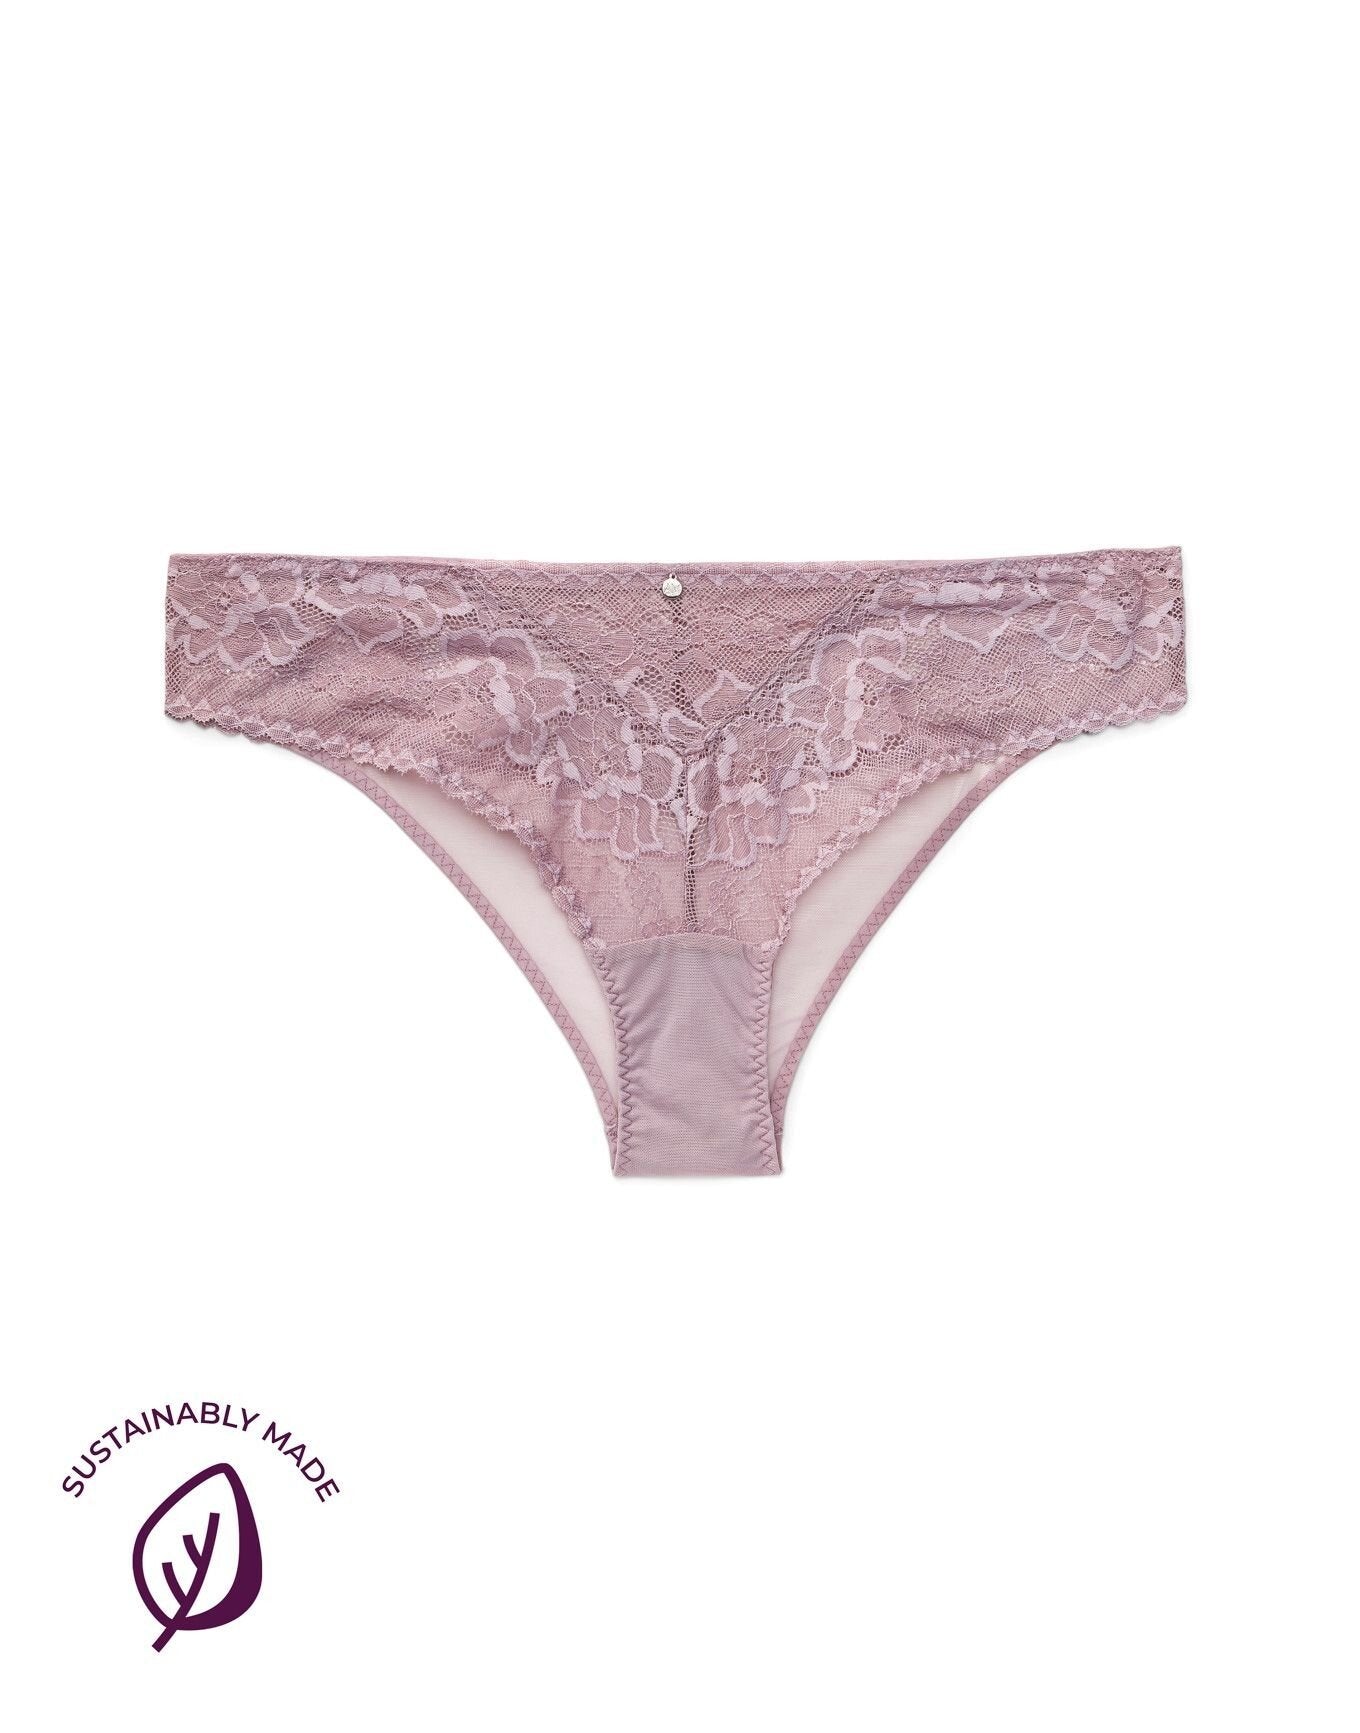 Adore Me Faira Cheeky in color Elderberry and shape cheeky